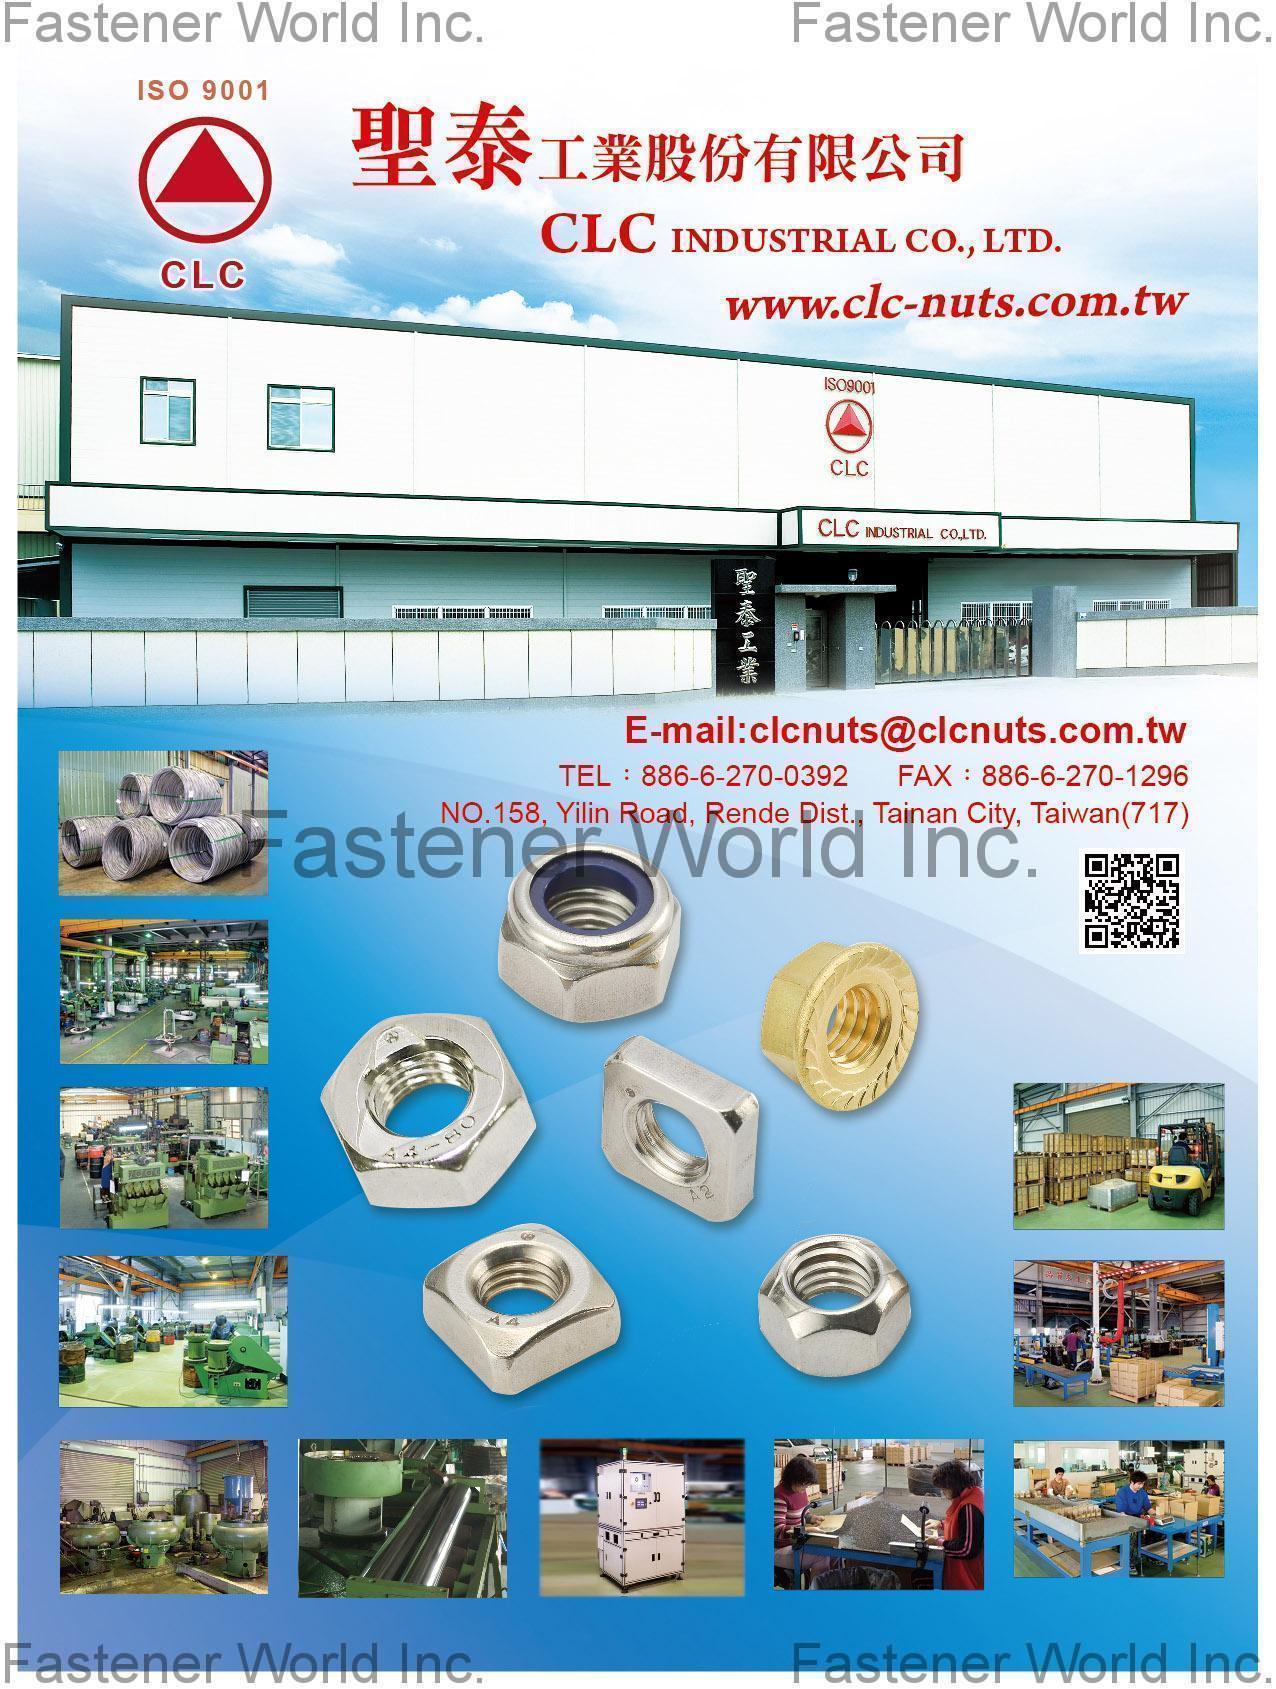 CLC INDUSTRIAL CO., LTD. , Nylon Insert Locknuts,DIN982,DIN985,Hex Machine Screw Nuts,Hex Finish Nuts,DIN934,Hex Jam Nuts,DIN439,Hex Heavy Nuts,UNI5587,Hex Lock Nuts,DIN980,Hex Flange Nuts,DIN6923,JIS B1190,Hex Flange Nylon Nuts,DIN 6926,Weld Nuts,DIN928,DIN929,Square Nuts,DIN557,DIN562,Hex K-Locknuts,Hex Nuts,JIS B1181 TYPE 1,JIS B1181 TYPE 2,JIS B1181 TYPE 3,Wing Nuts,Socket Set Screw,DIN912,DIN913,DIN916,ISO7380,Brass Nuts,Special Nuts,Hex Cap Nuts,Coupling Nuts,T-Nuts,Washer,Conical Nuts , All Kinds Of Nuts